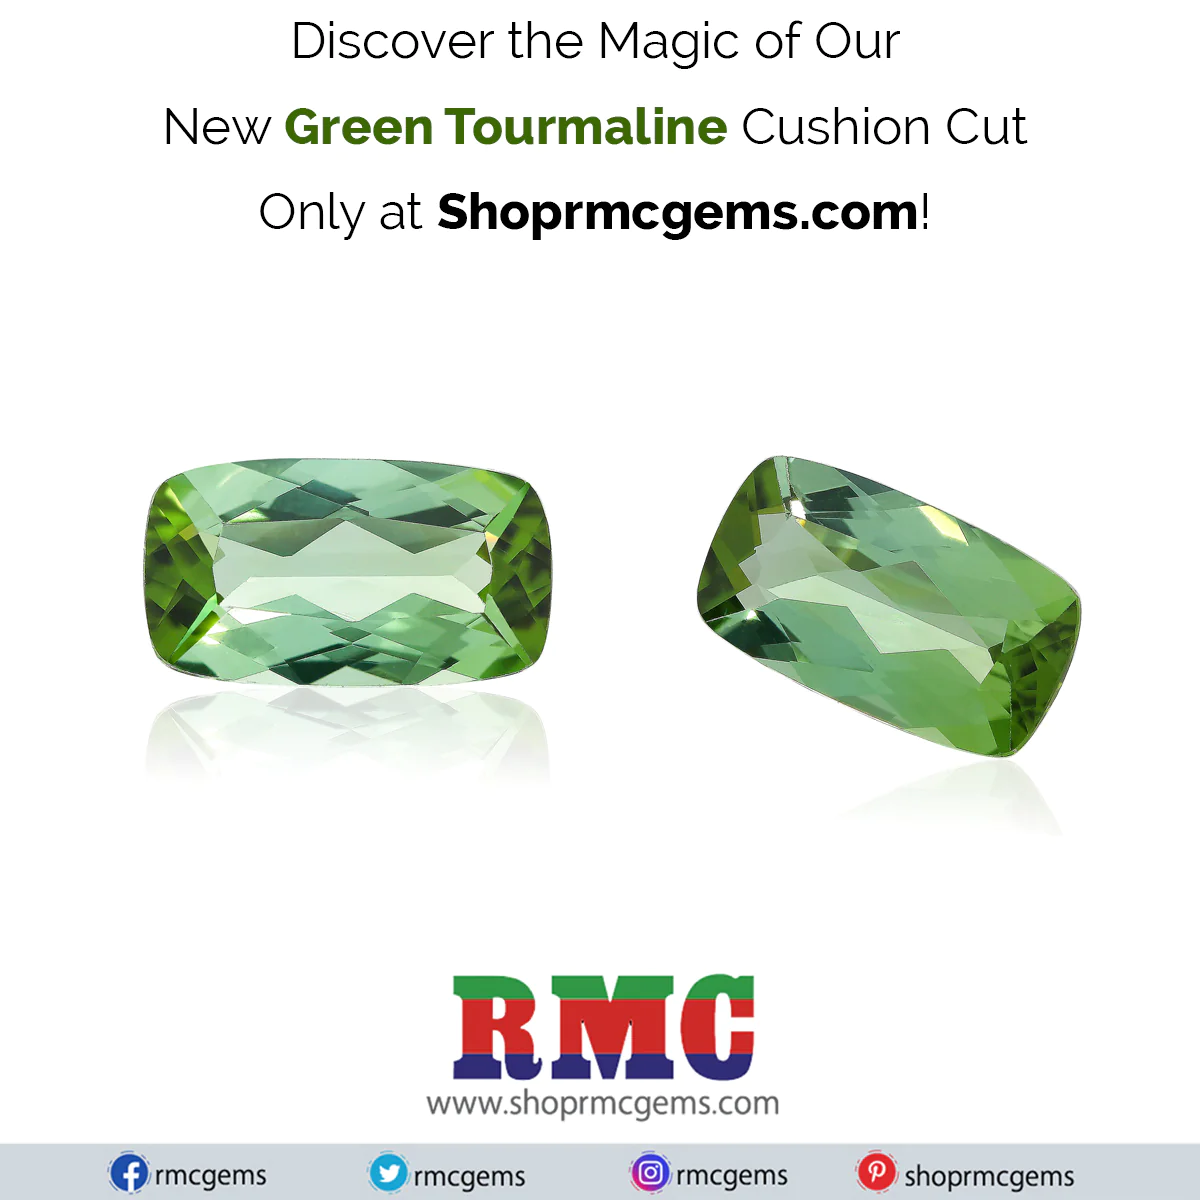 Experience the mesmerizing allure of the newest Green Tourmaline Cushion Cut from RMC – available exclusively at Shoprmcgems!